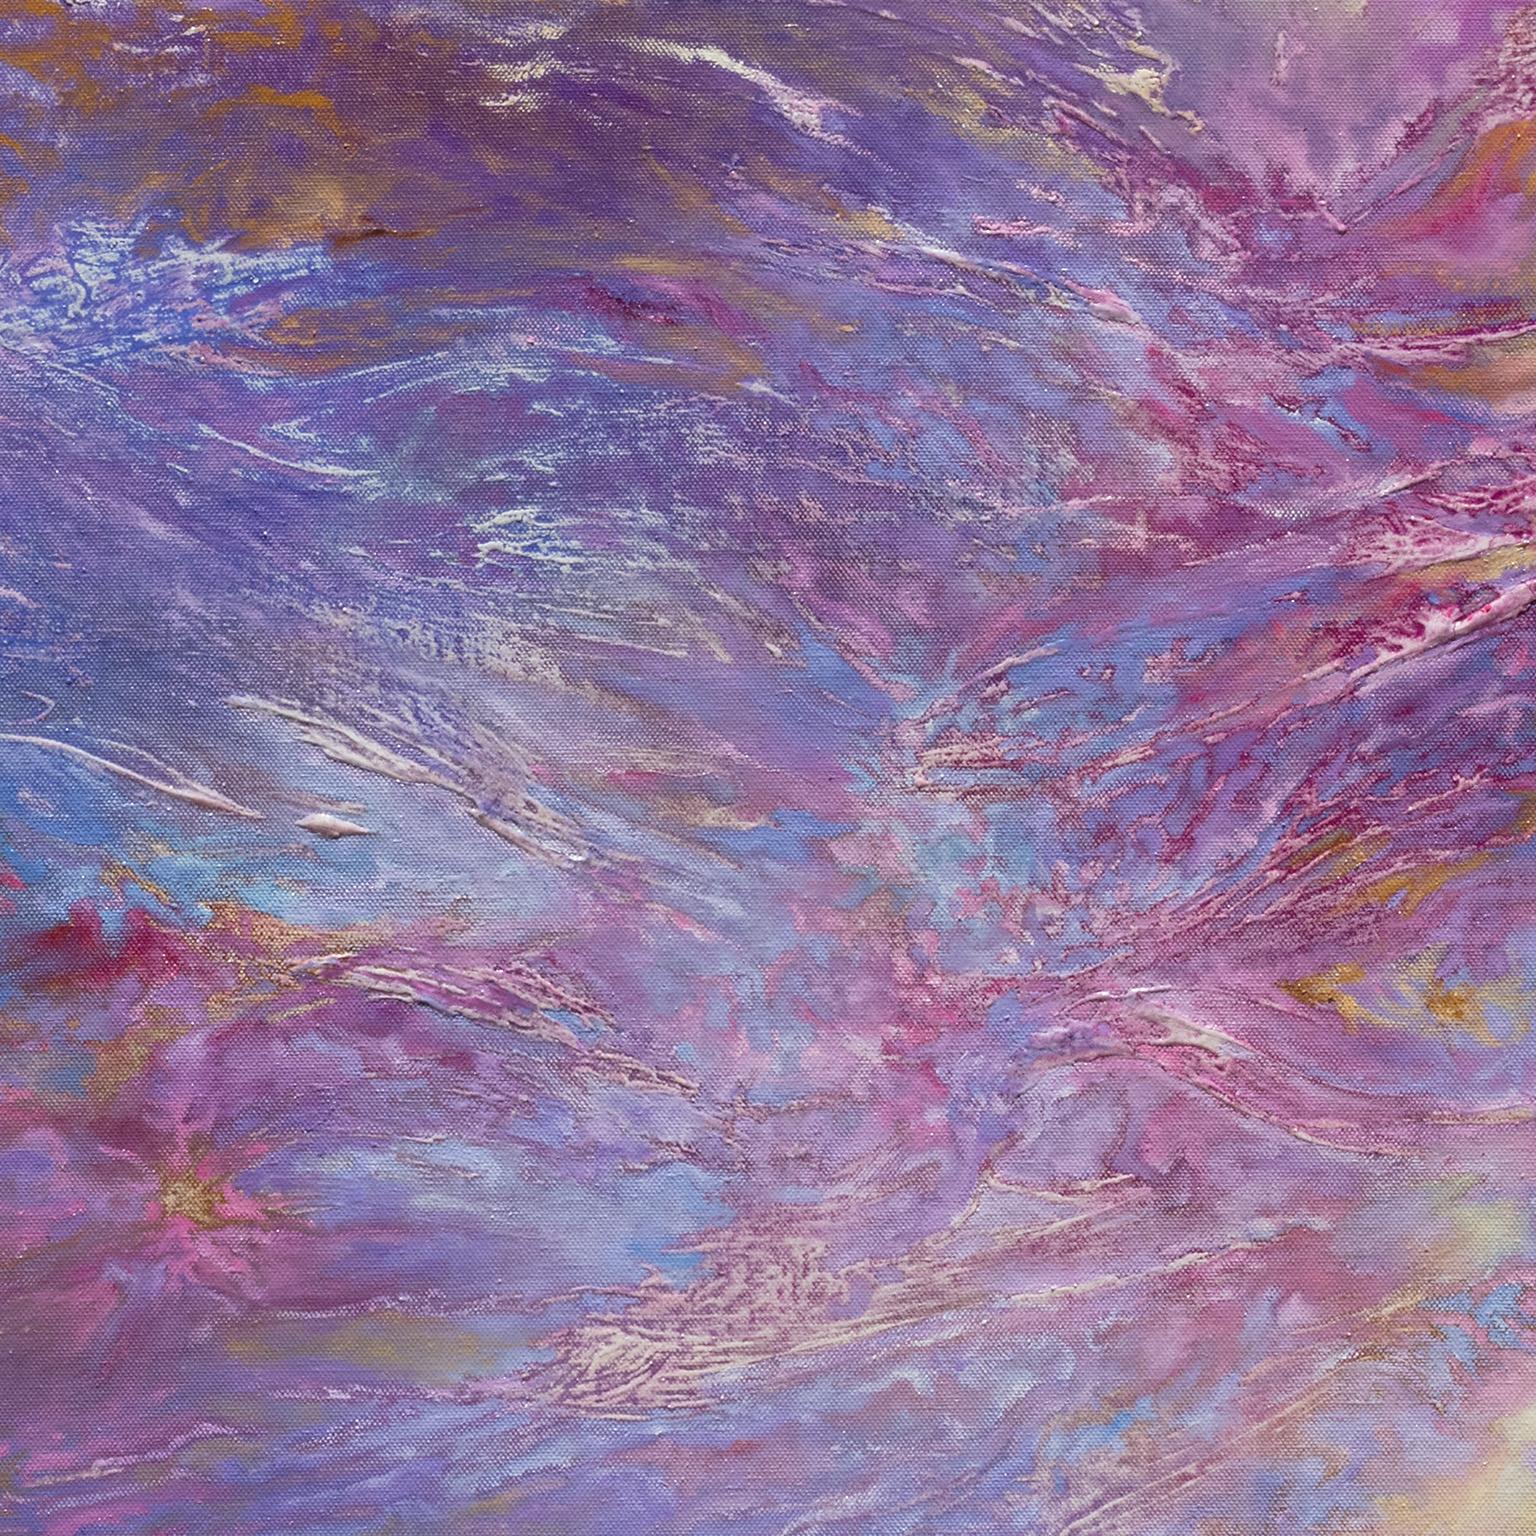 Ver Vernat (Spring Swirls) - Abstract Purple Painting with Reference to Nature - Gray Landscape Painting by Ruggero Vanni